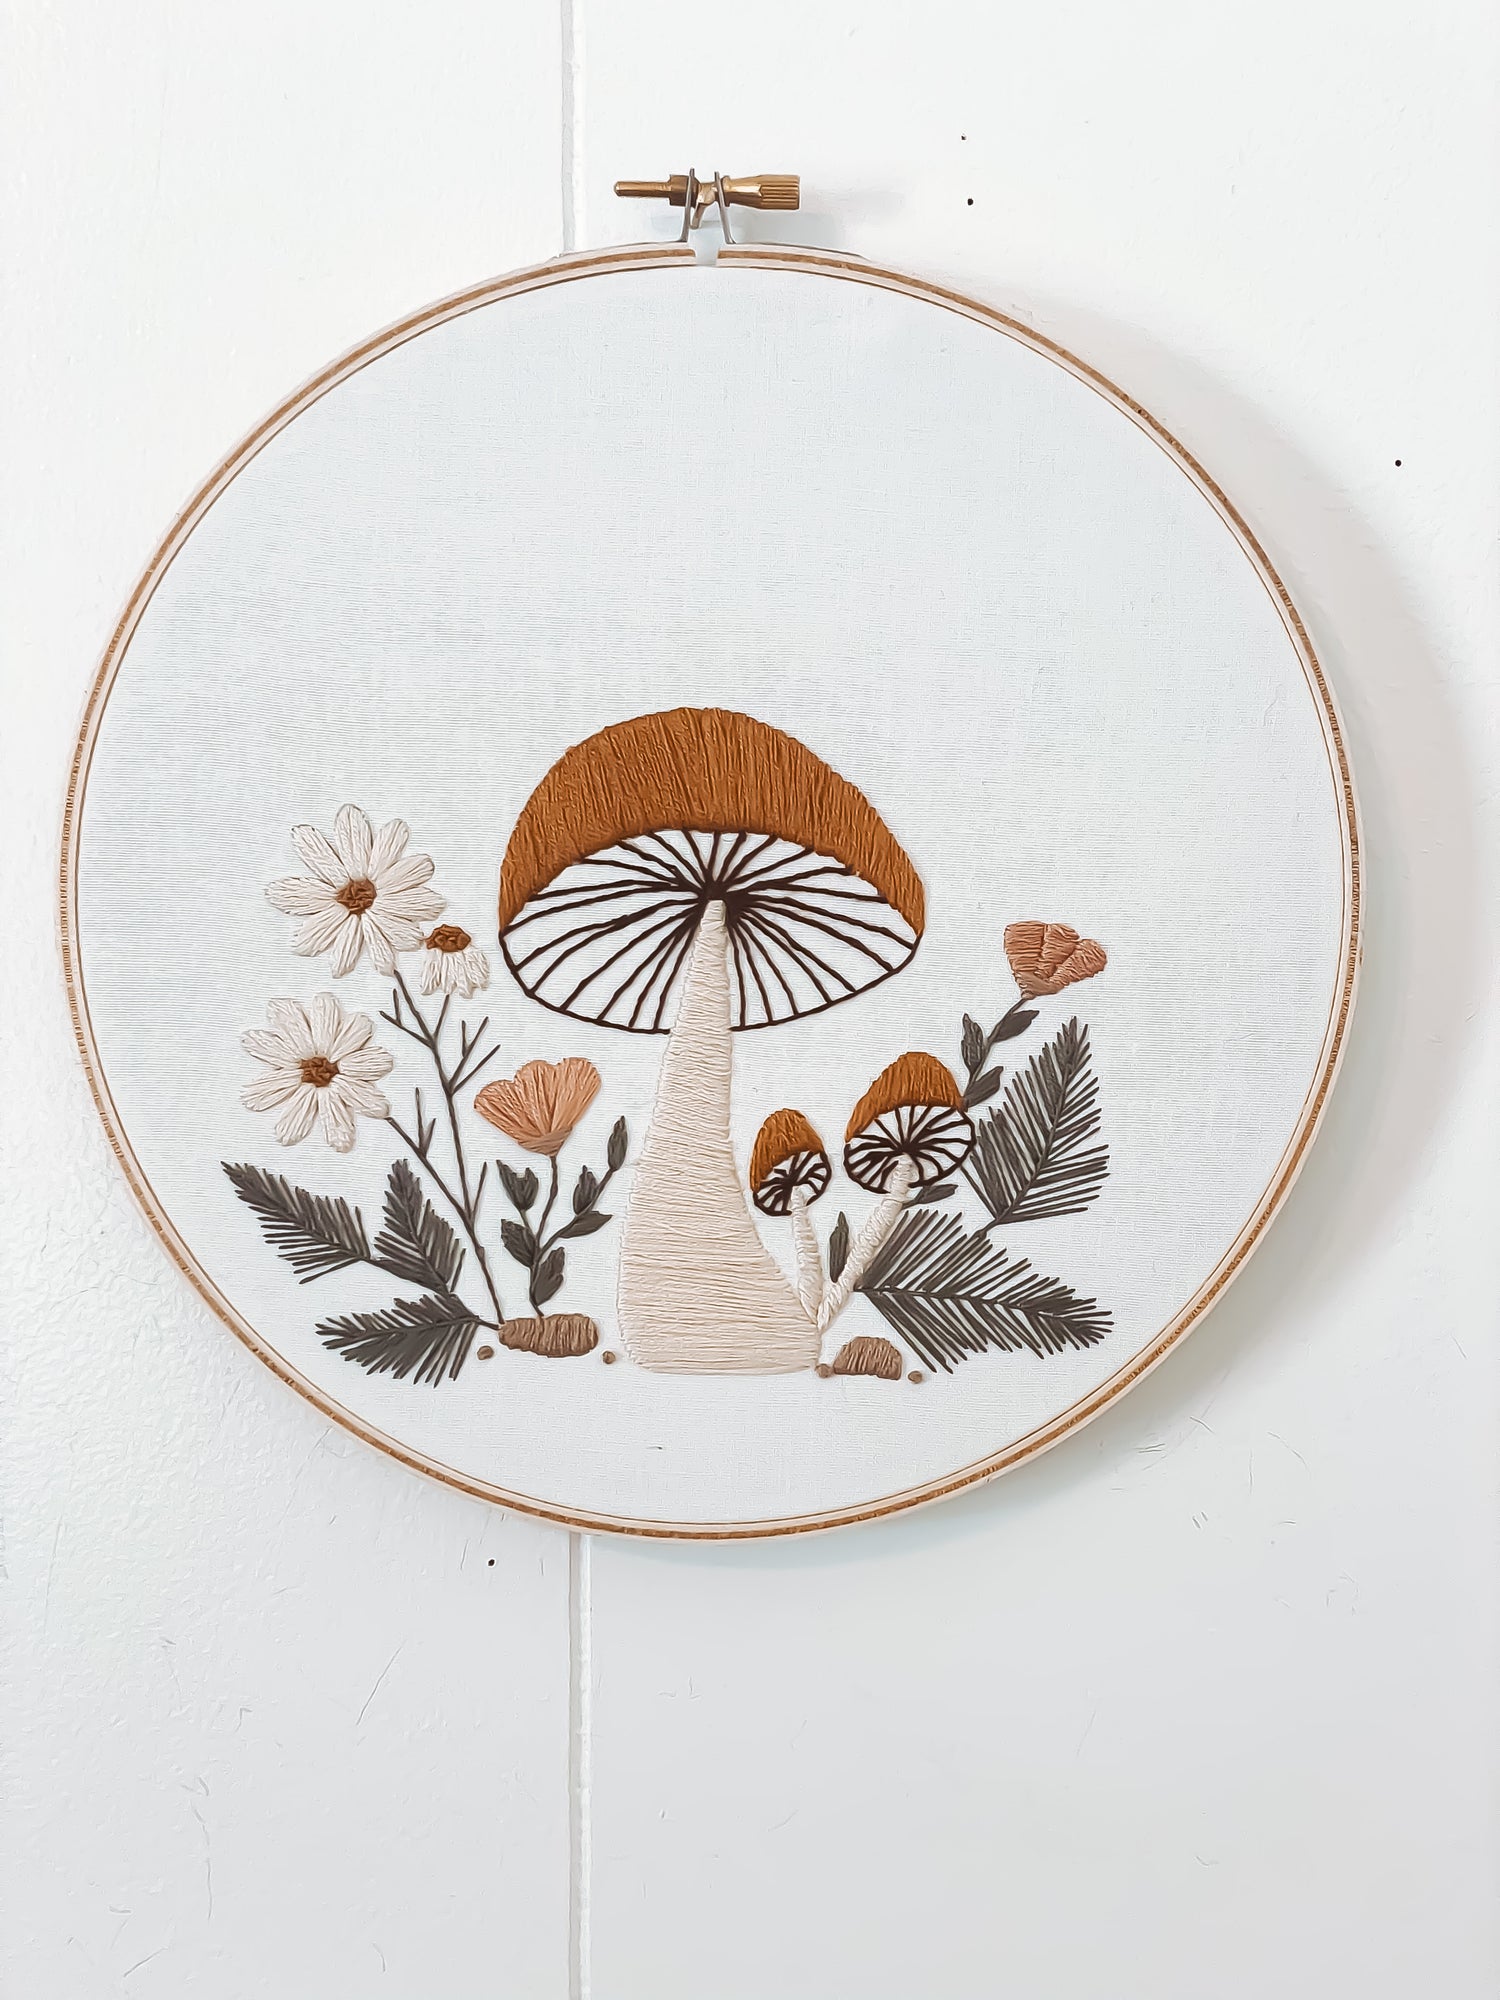 DIY EMBROIDERY PROJECTS